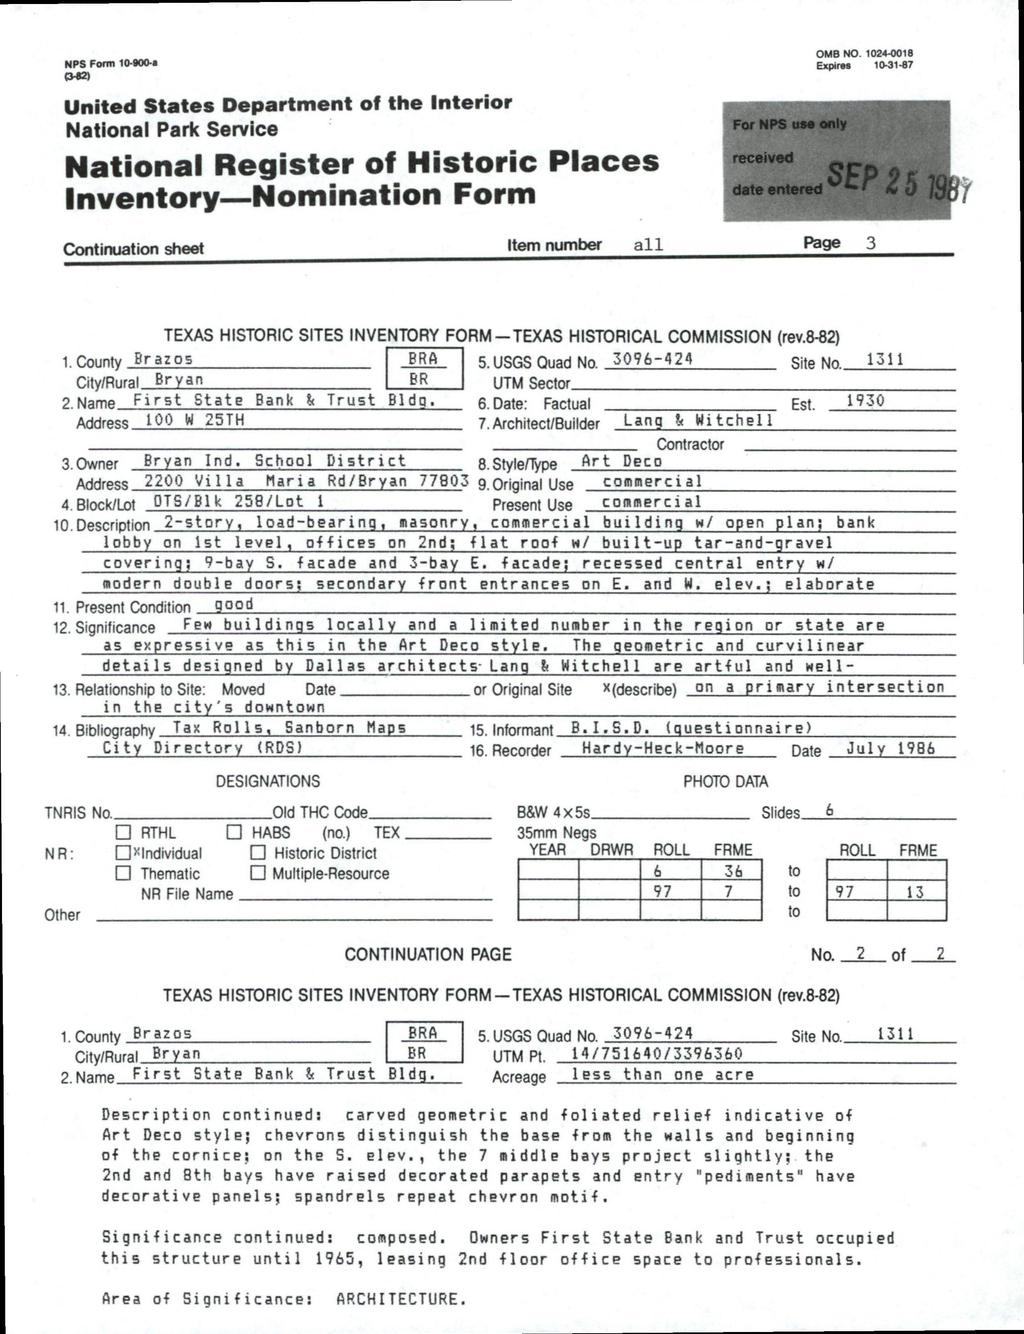 NPS Form 10-»00-«OMB NO 1024^X118 Exptrw 10-31-87 United States Department off the Interior National Park Service National Register of Historic Piaces Inventory Nomination Form CkMitlnuation sheet